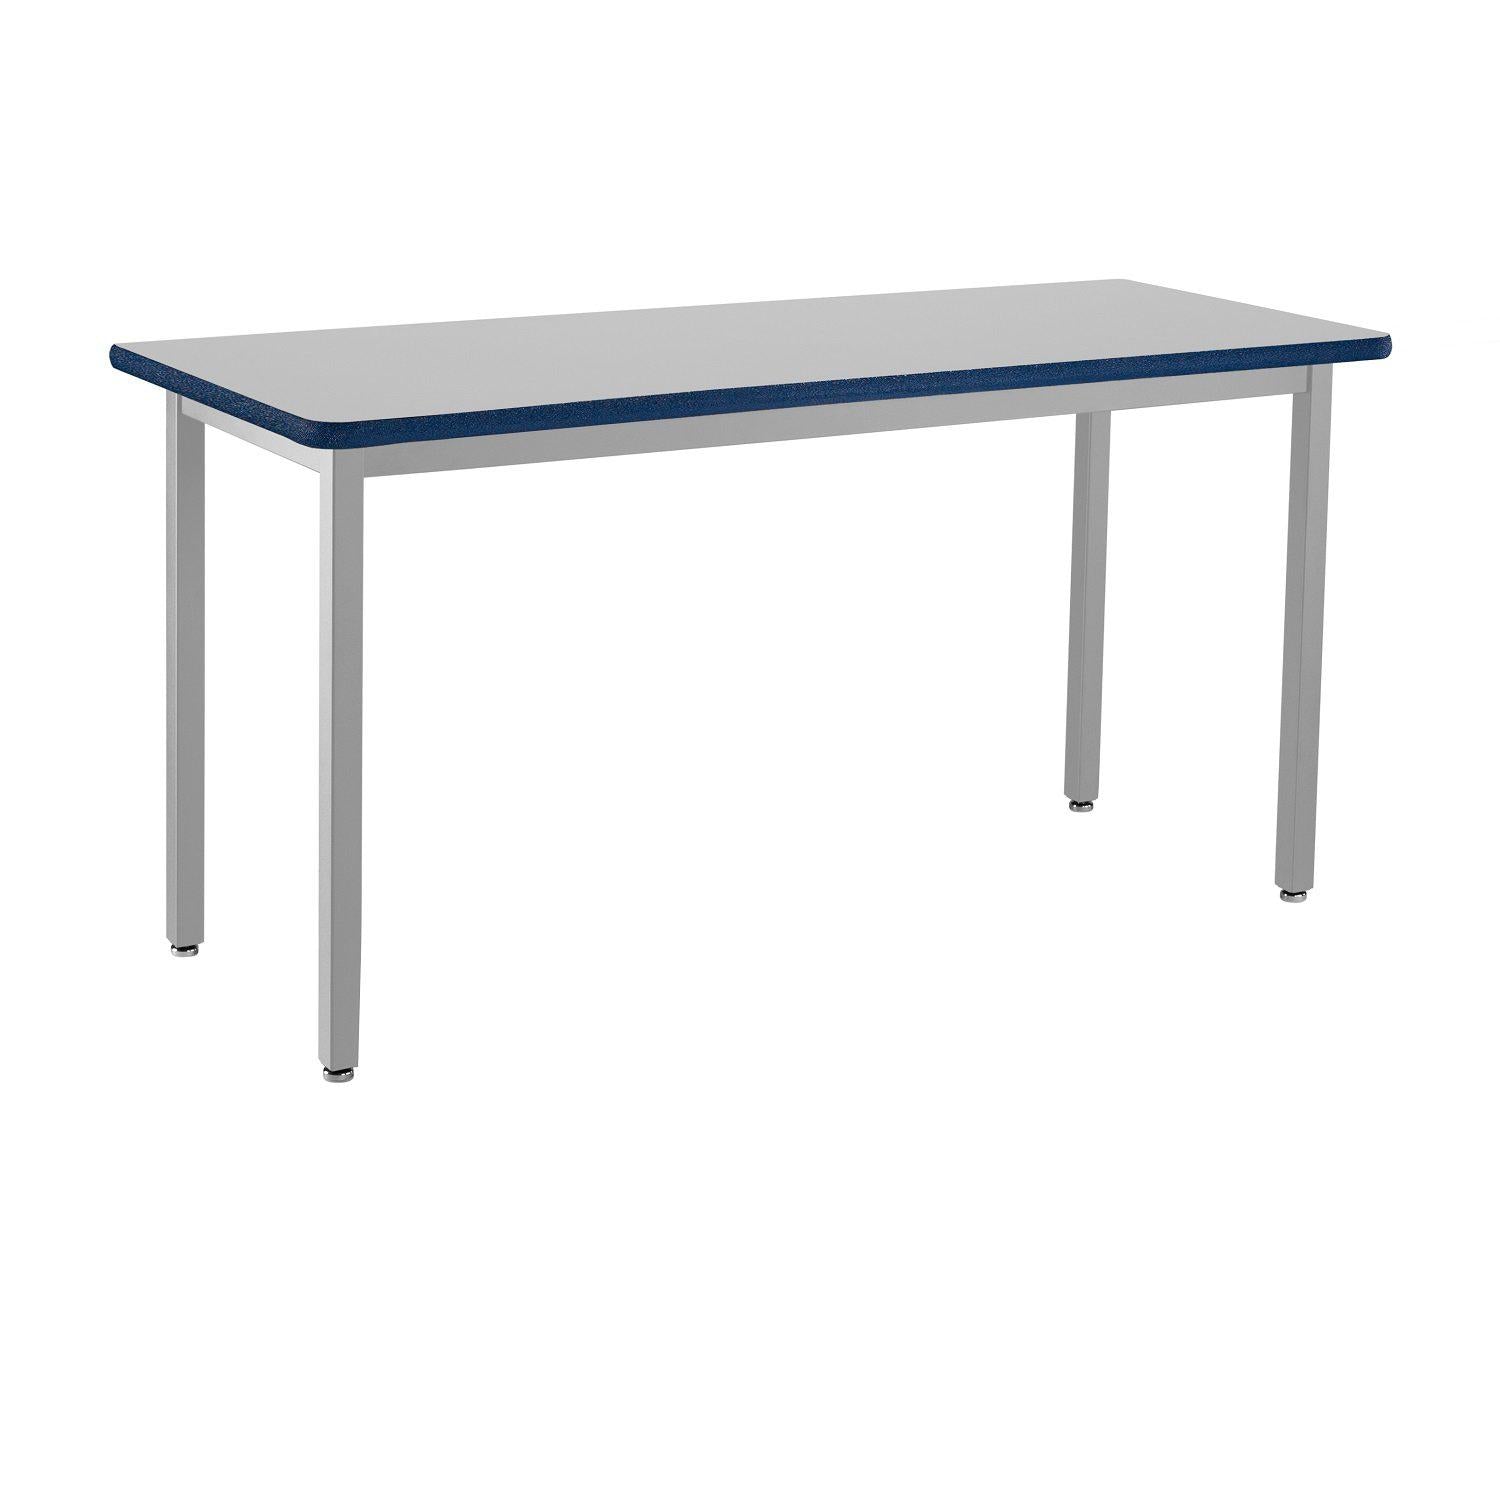 Heavy-Duty Fixed Height Utility Table, Soft Grey Frame, 30" x 42", Supreme High-Pressure Laminate Top with Black ProtectEdge